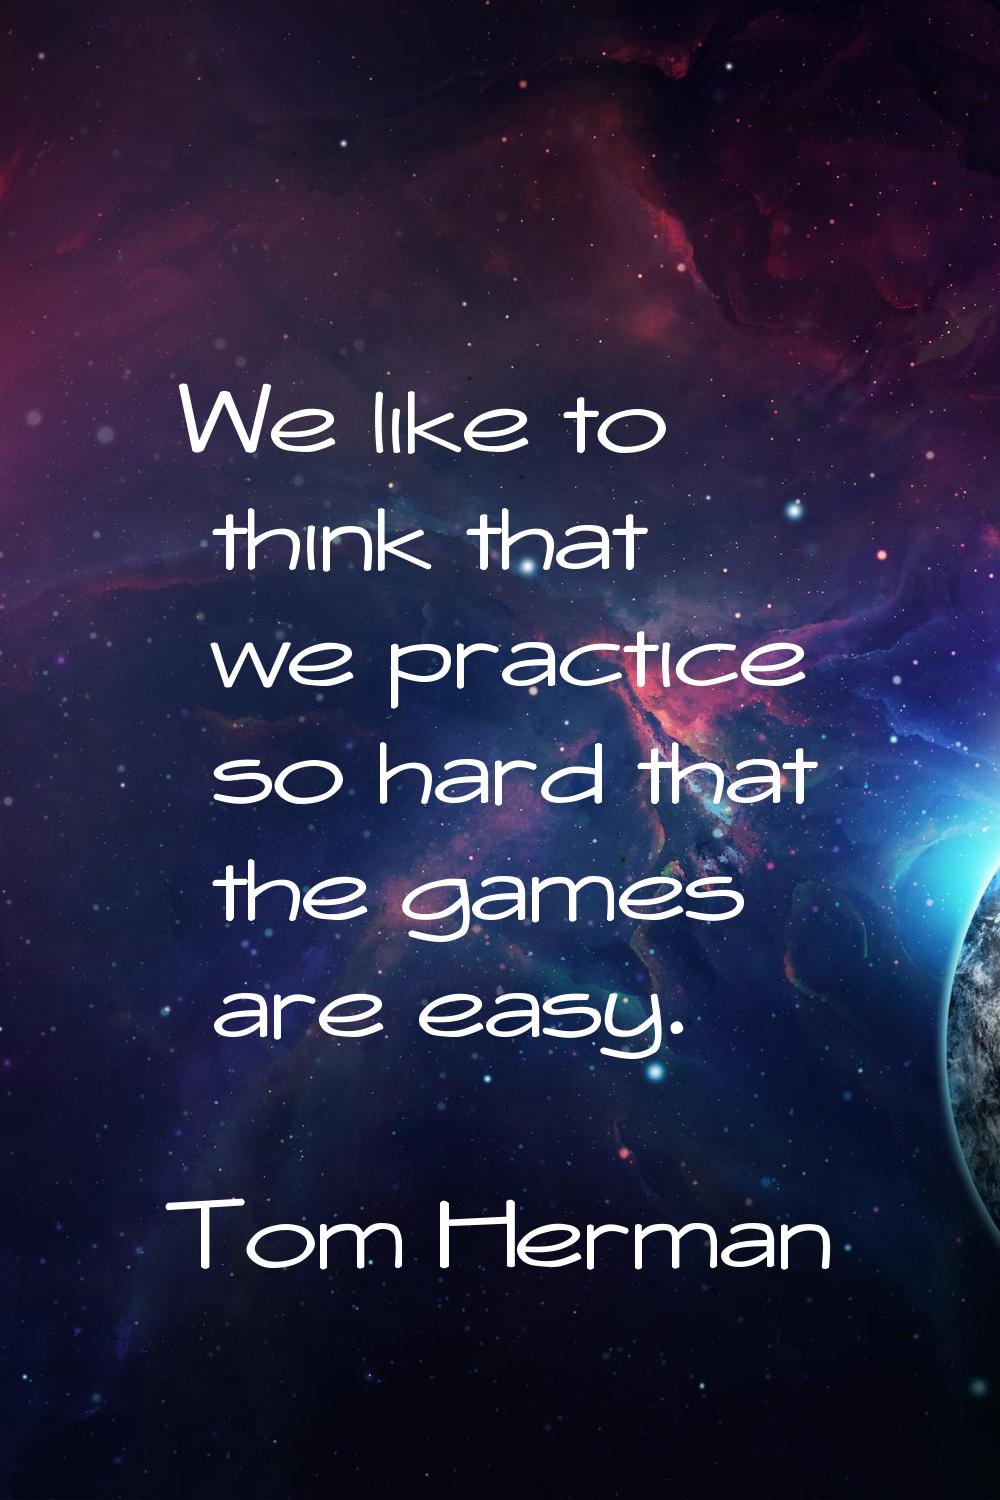 We like to think that we practice so hard that the games are easy.